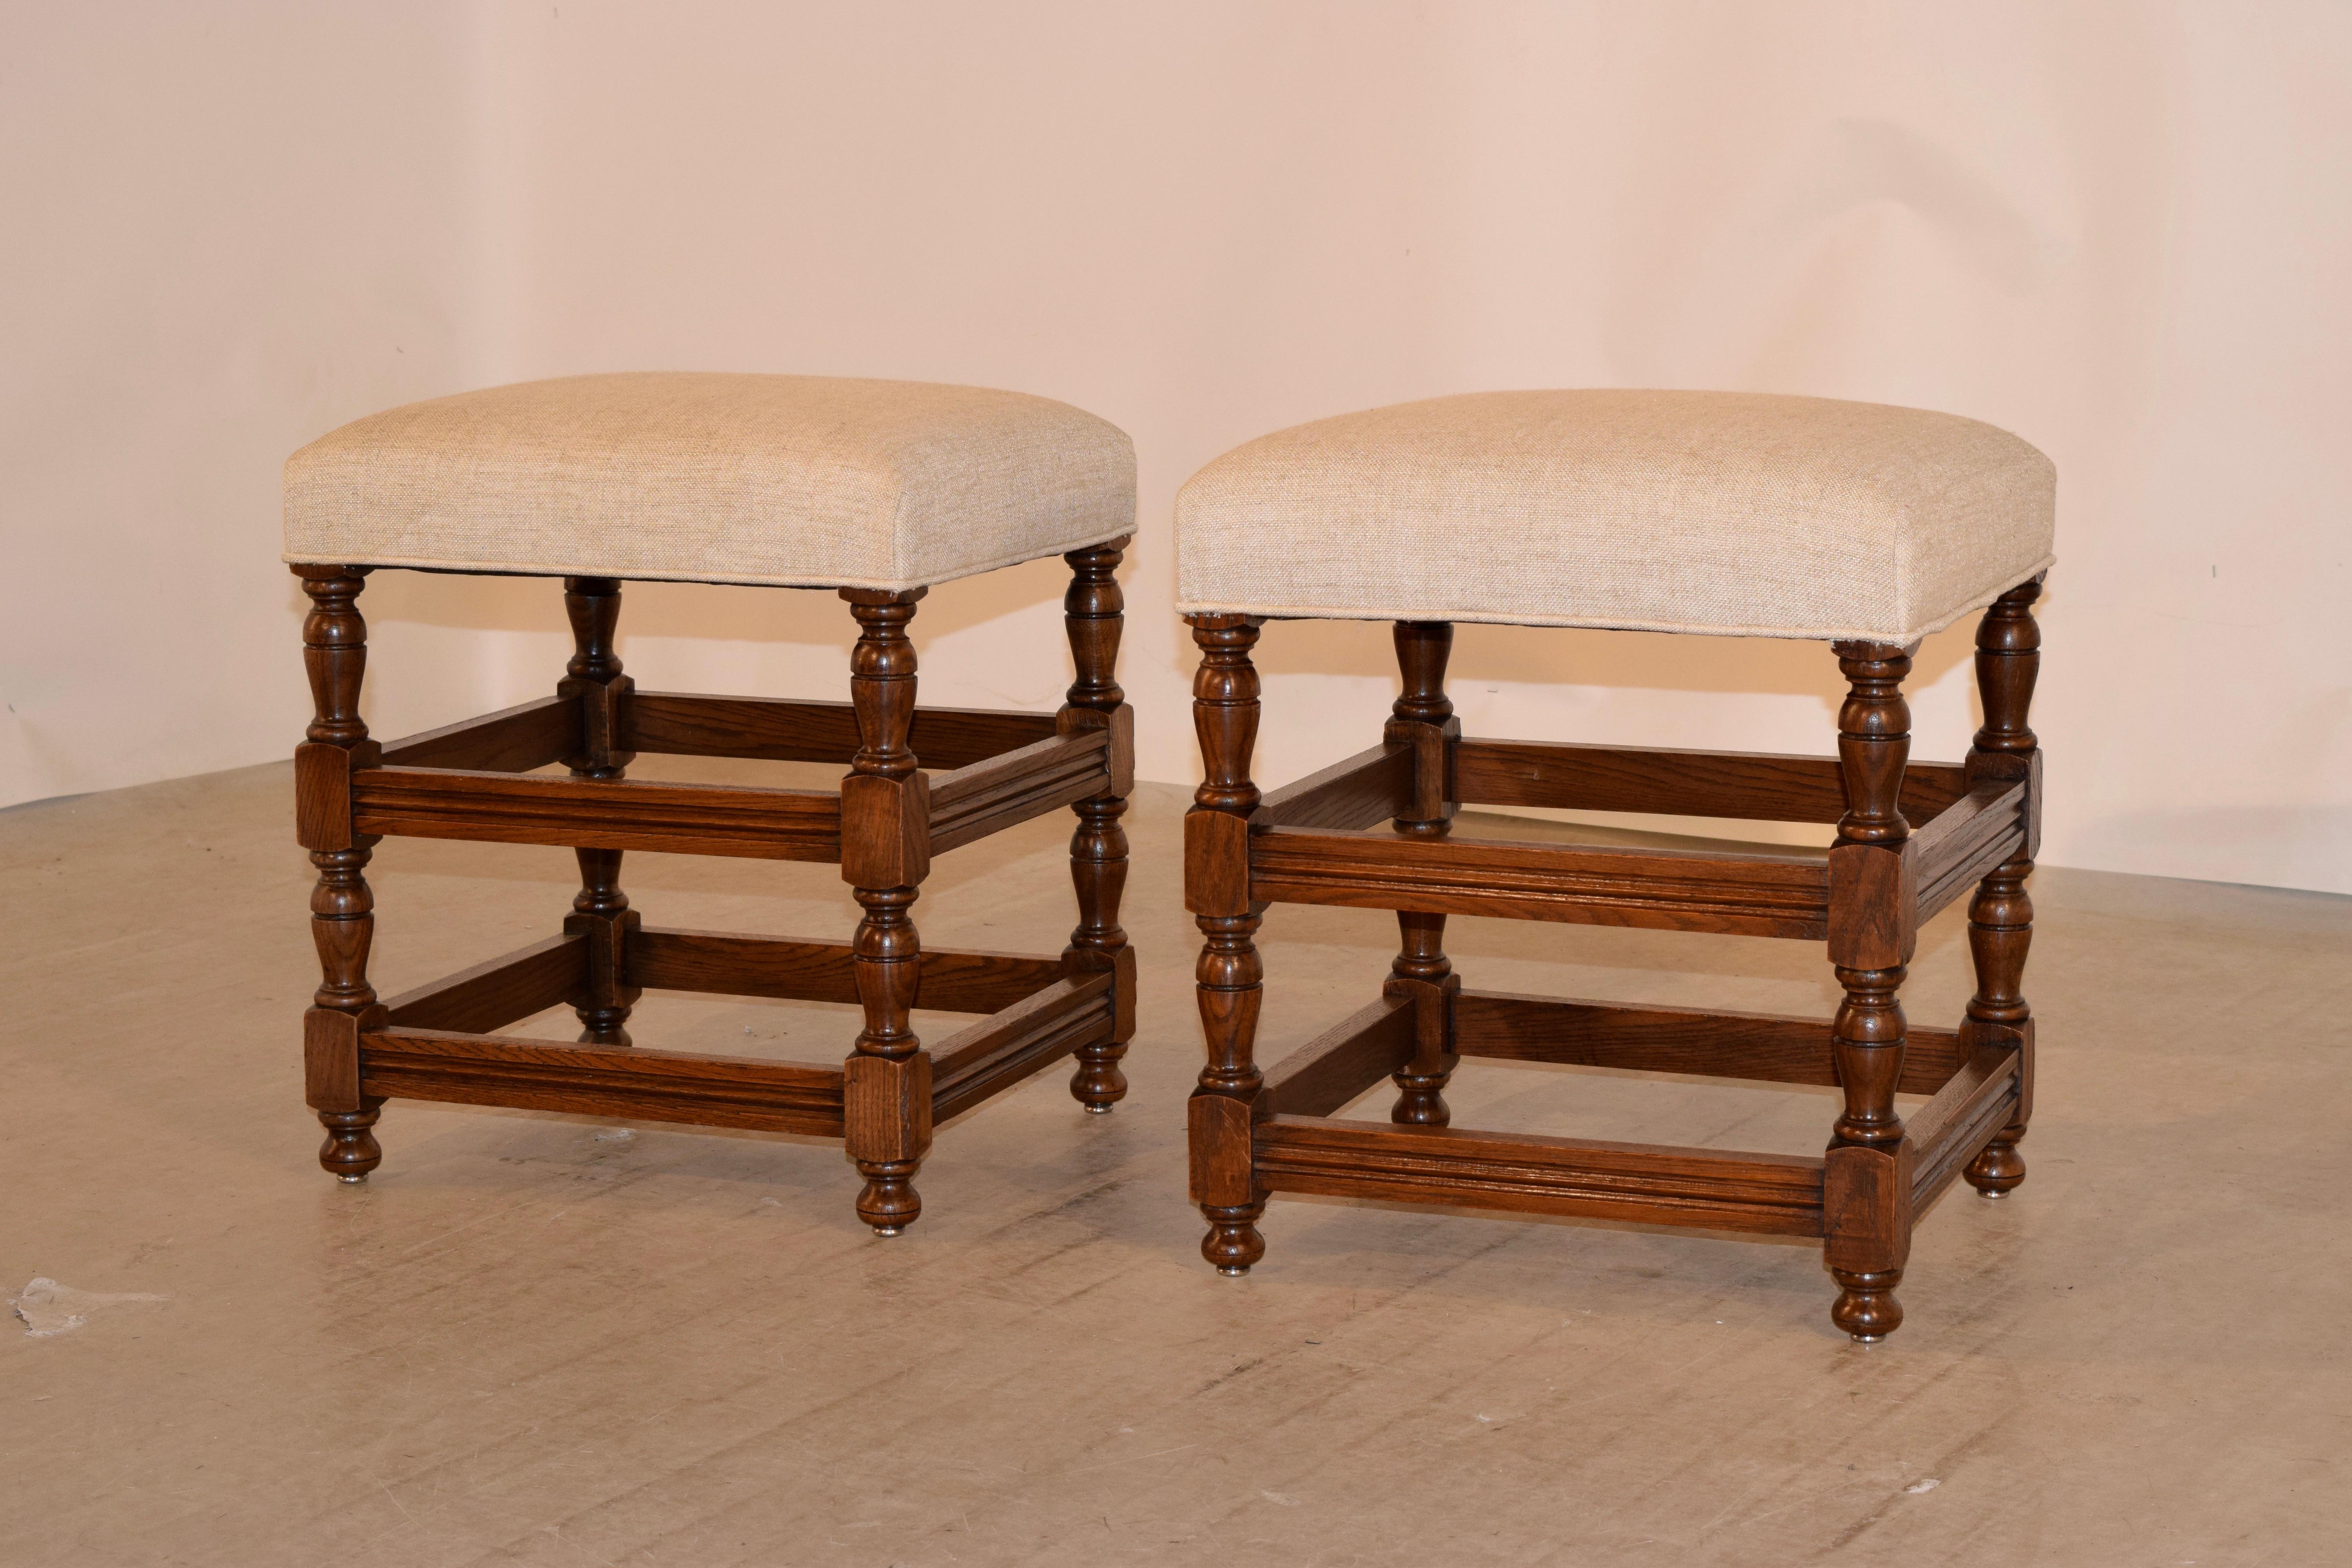 Pair of English oak turned stools with newly upholstered seats in linen. The frames have hand-turned legs joined by molded cross stretchers and raised on hand-turned feet.